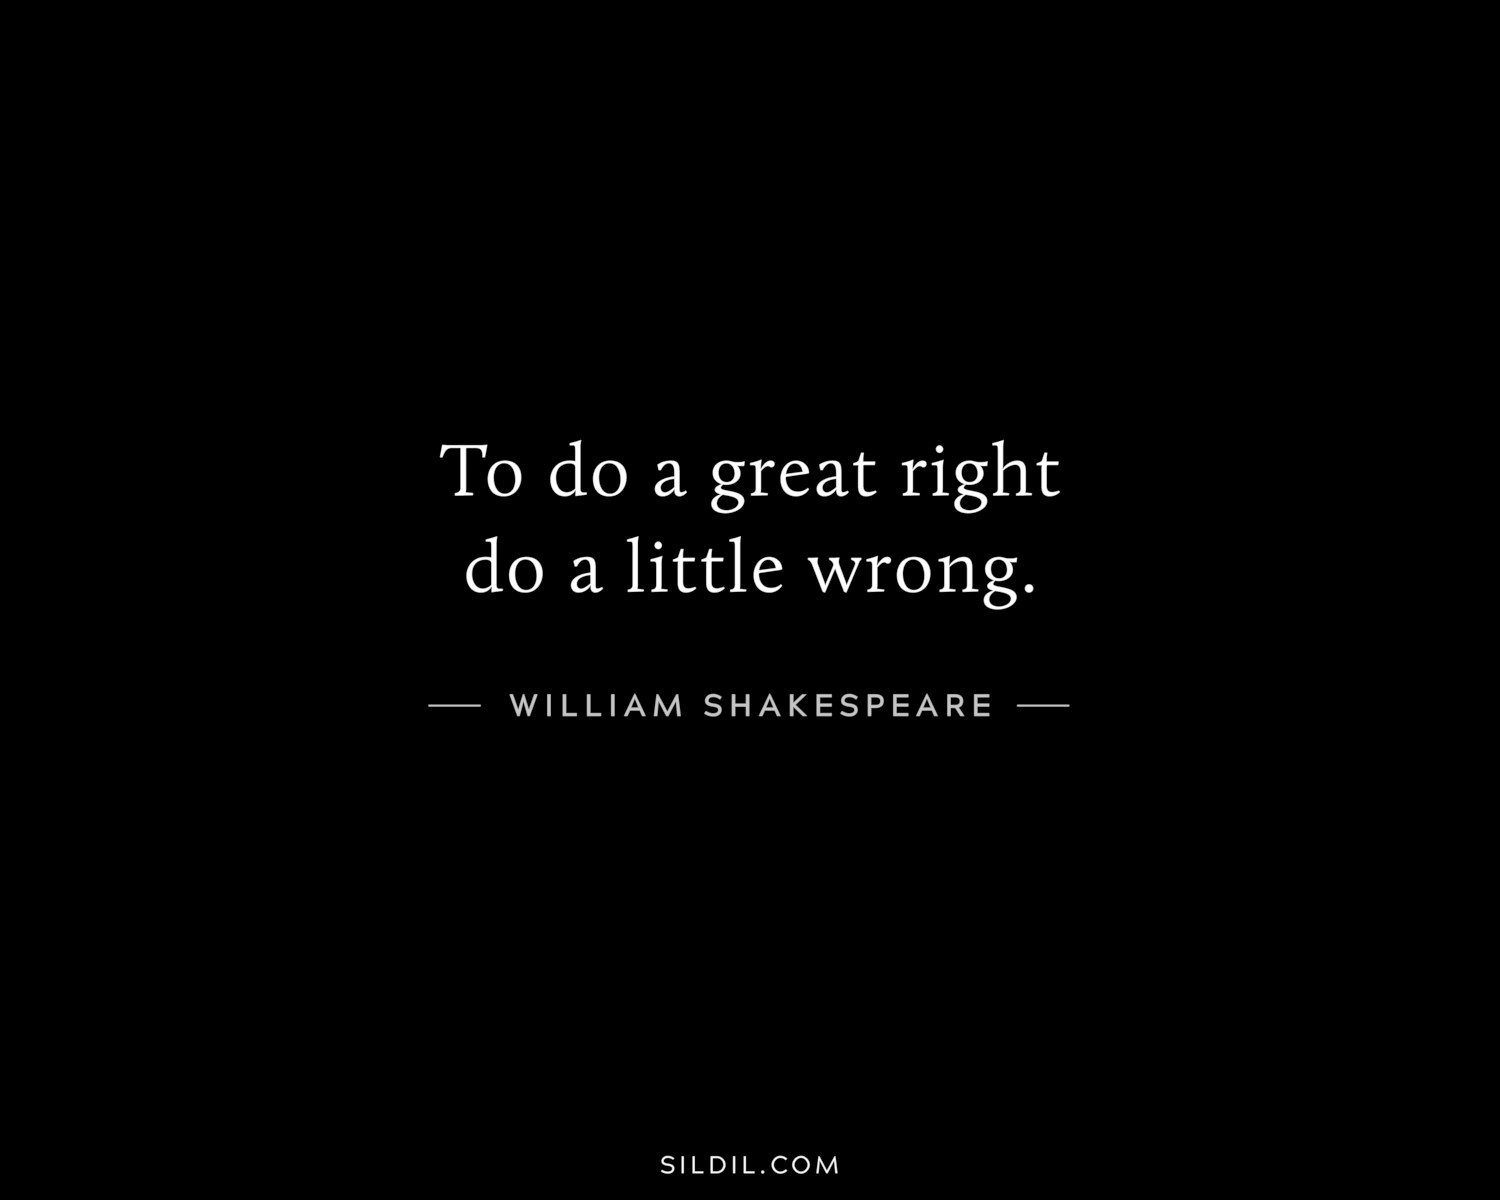 To do a great right do a little wrong.